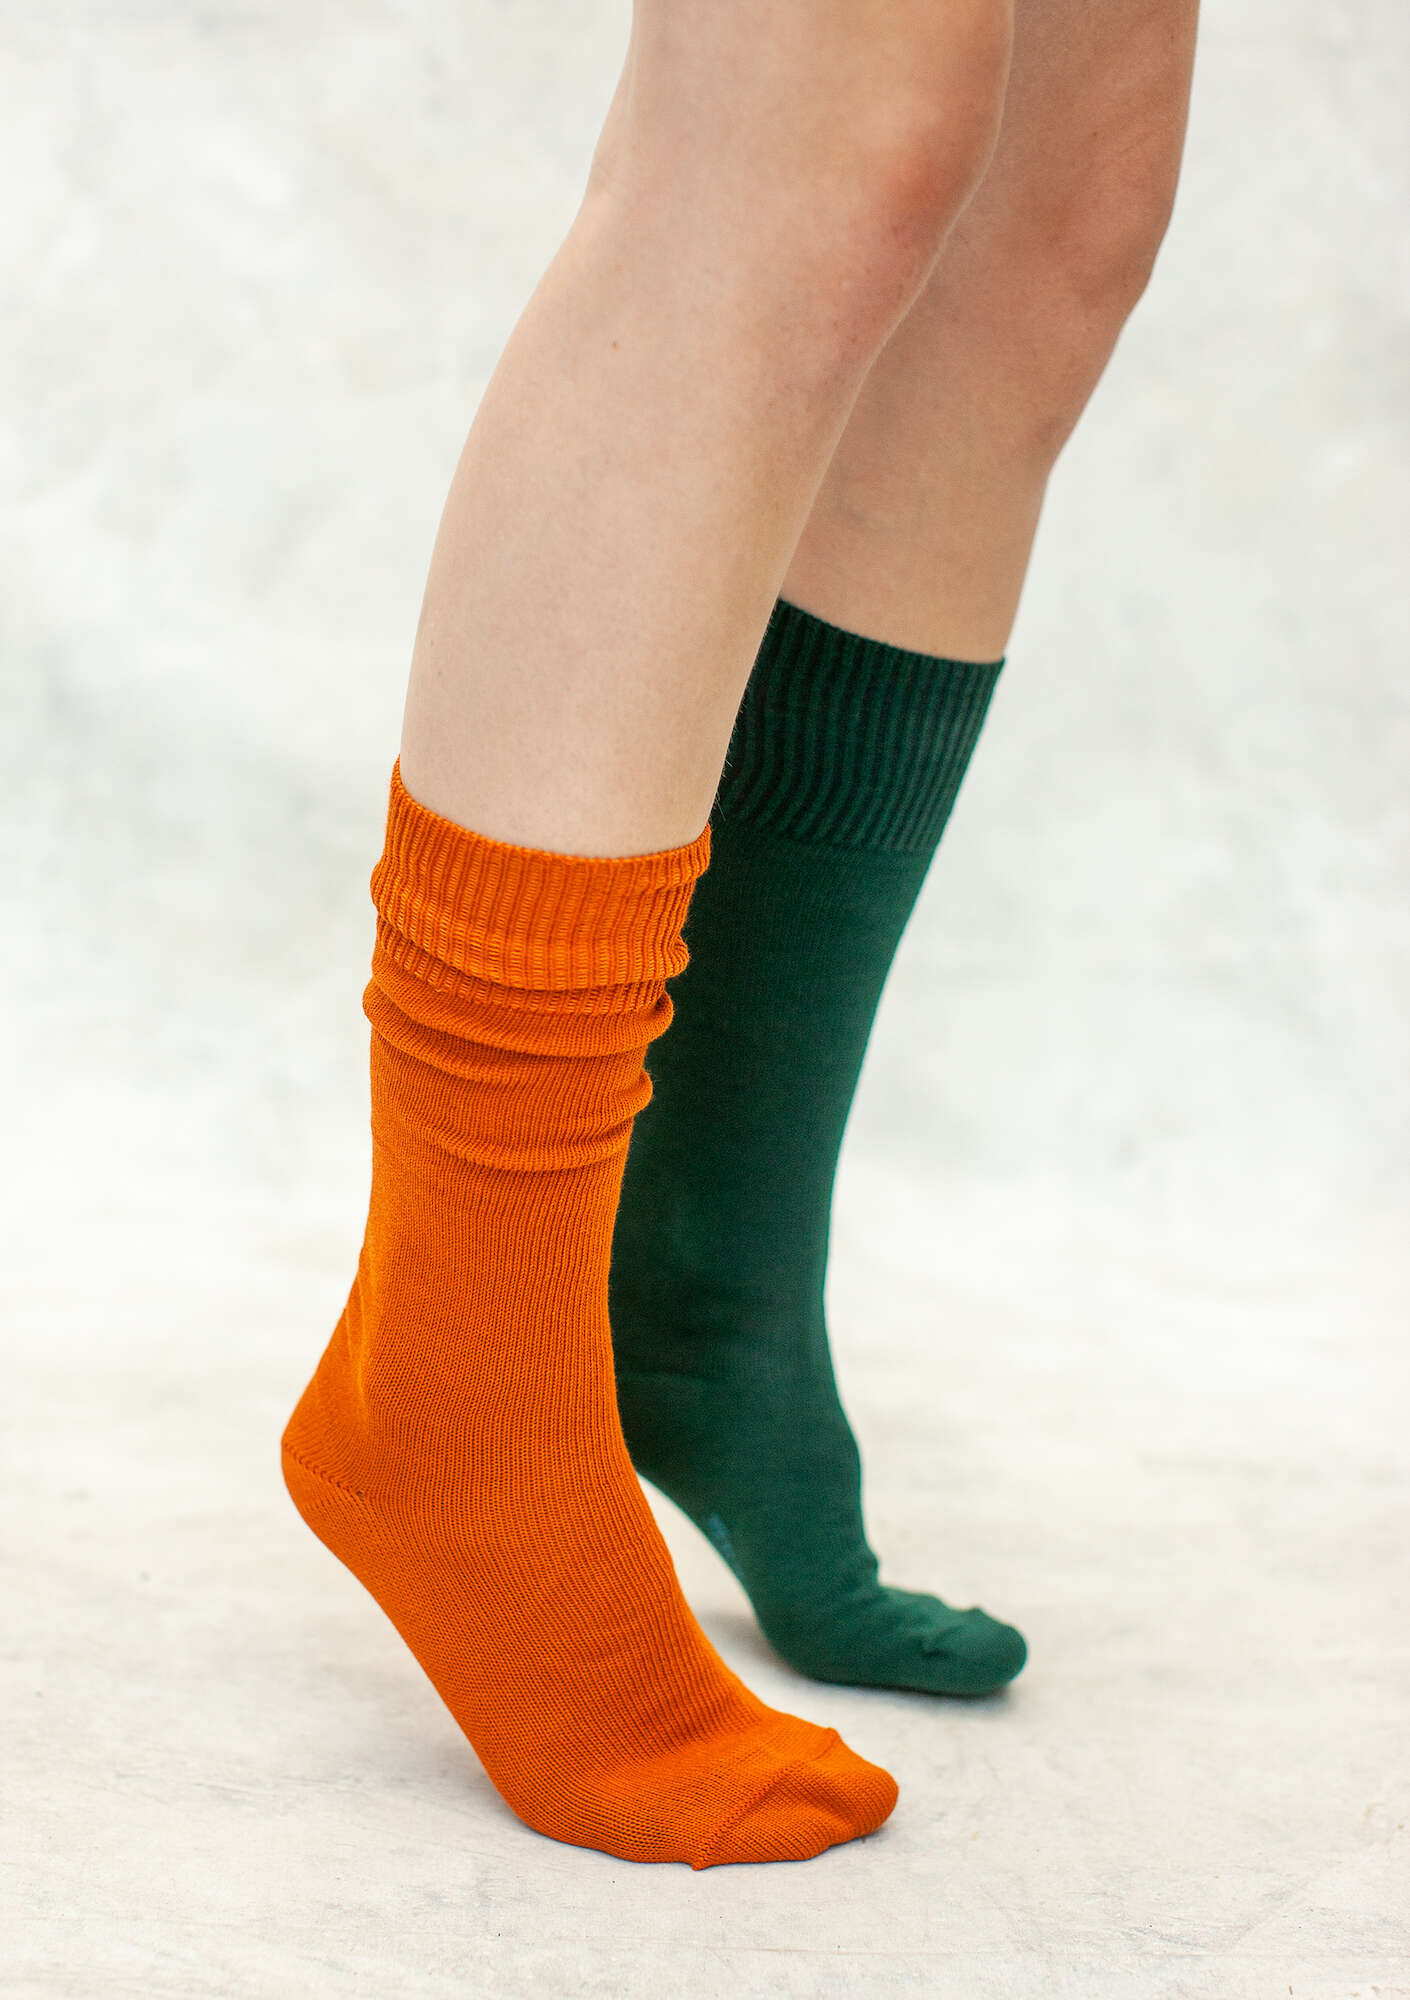 Solid-colored knee-highs in organic cotton henna thumbnail